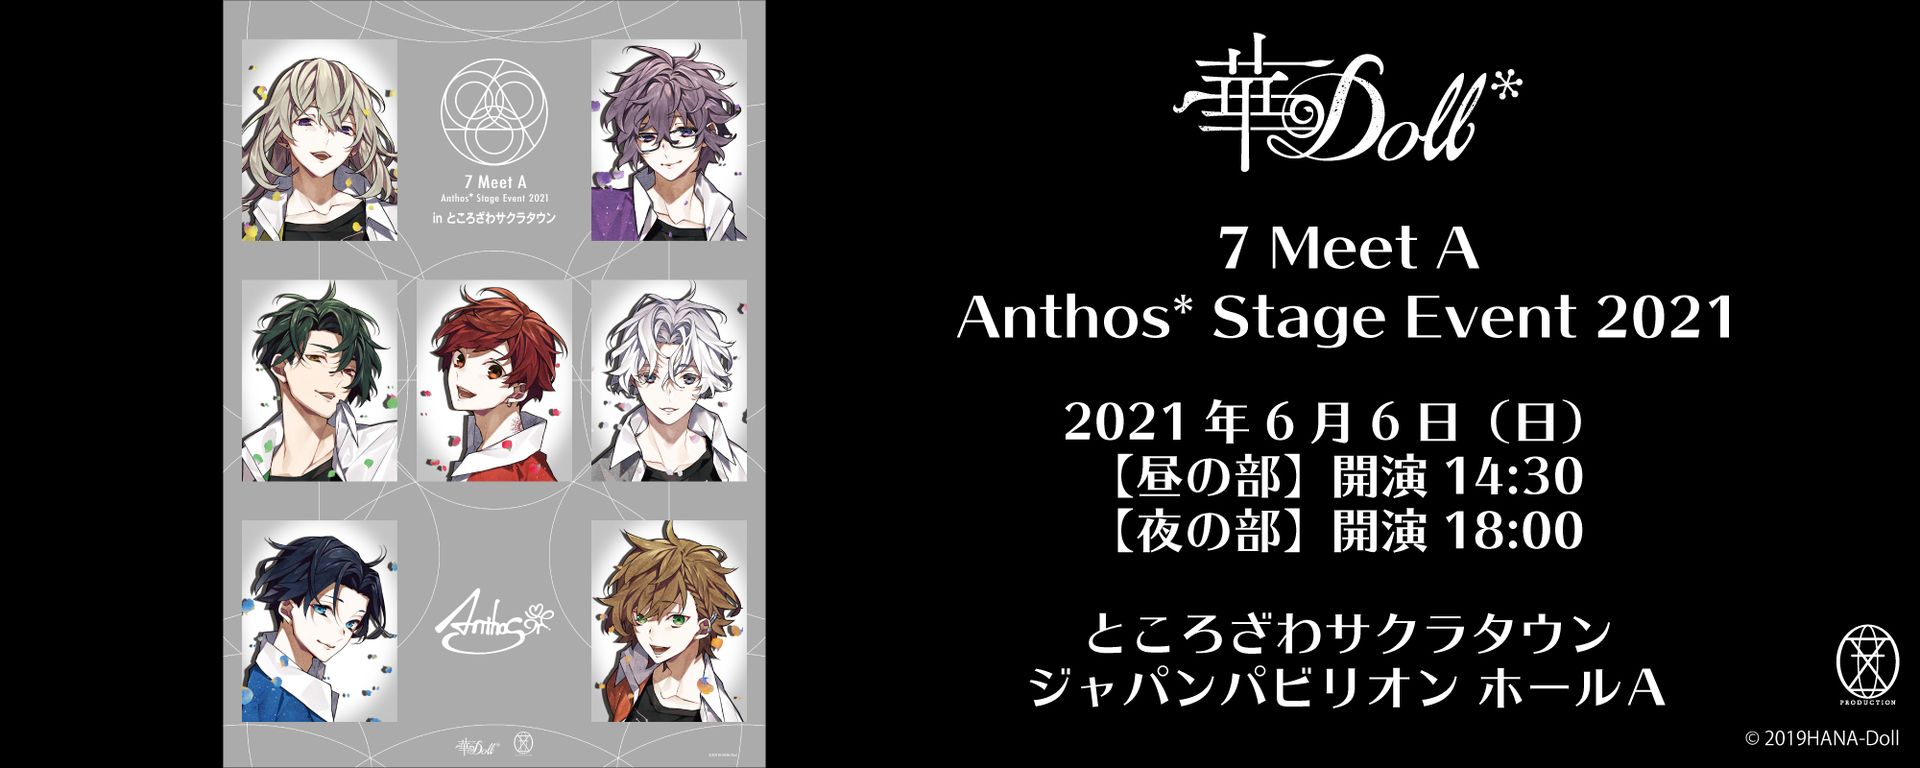 [Streaming+] 華Doll＊　7 Meet A　Anthos* Stage Event 2021